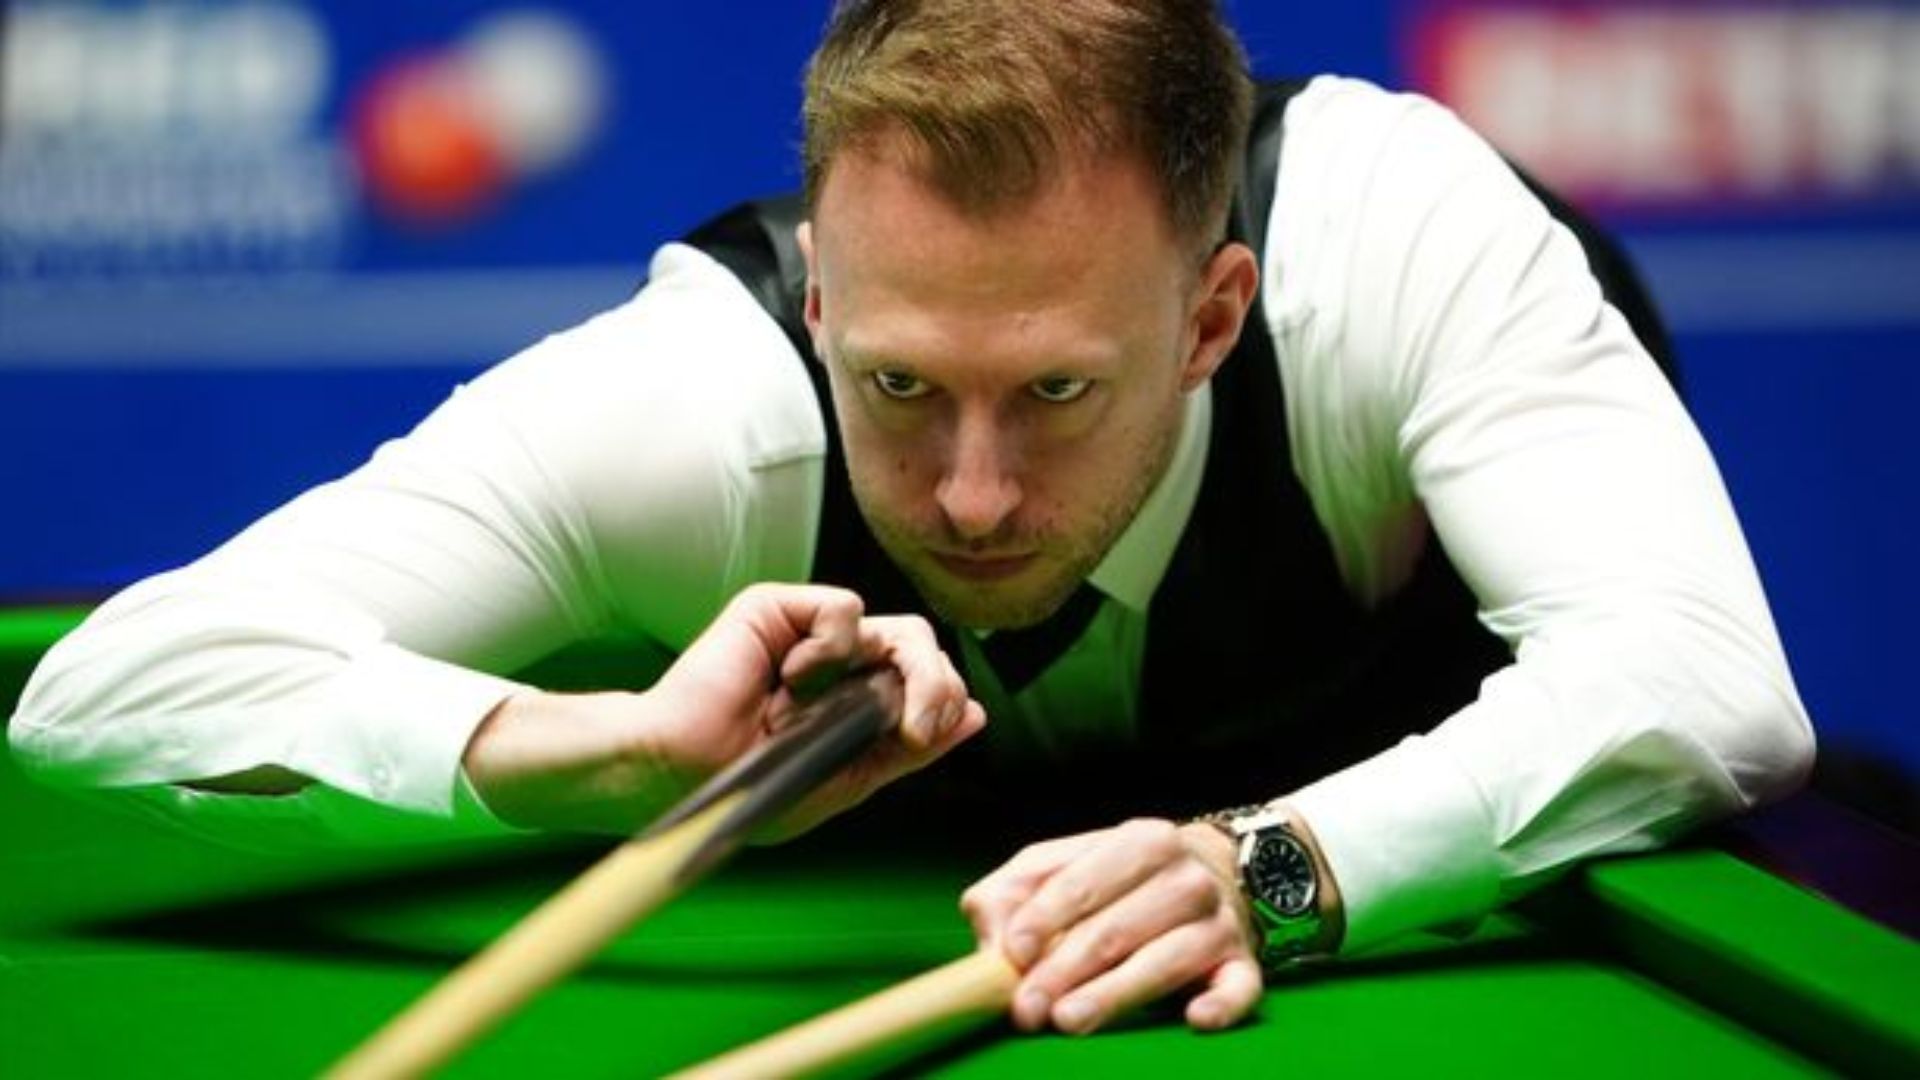 Judd Trump Net Worth - An English Professional Snooker Player, A Former World Champion And Former World Number One